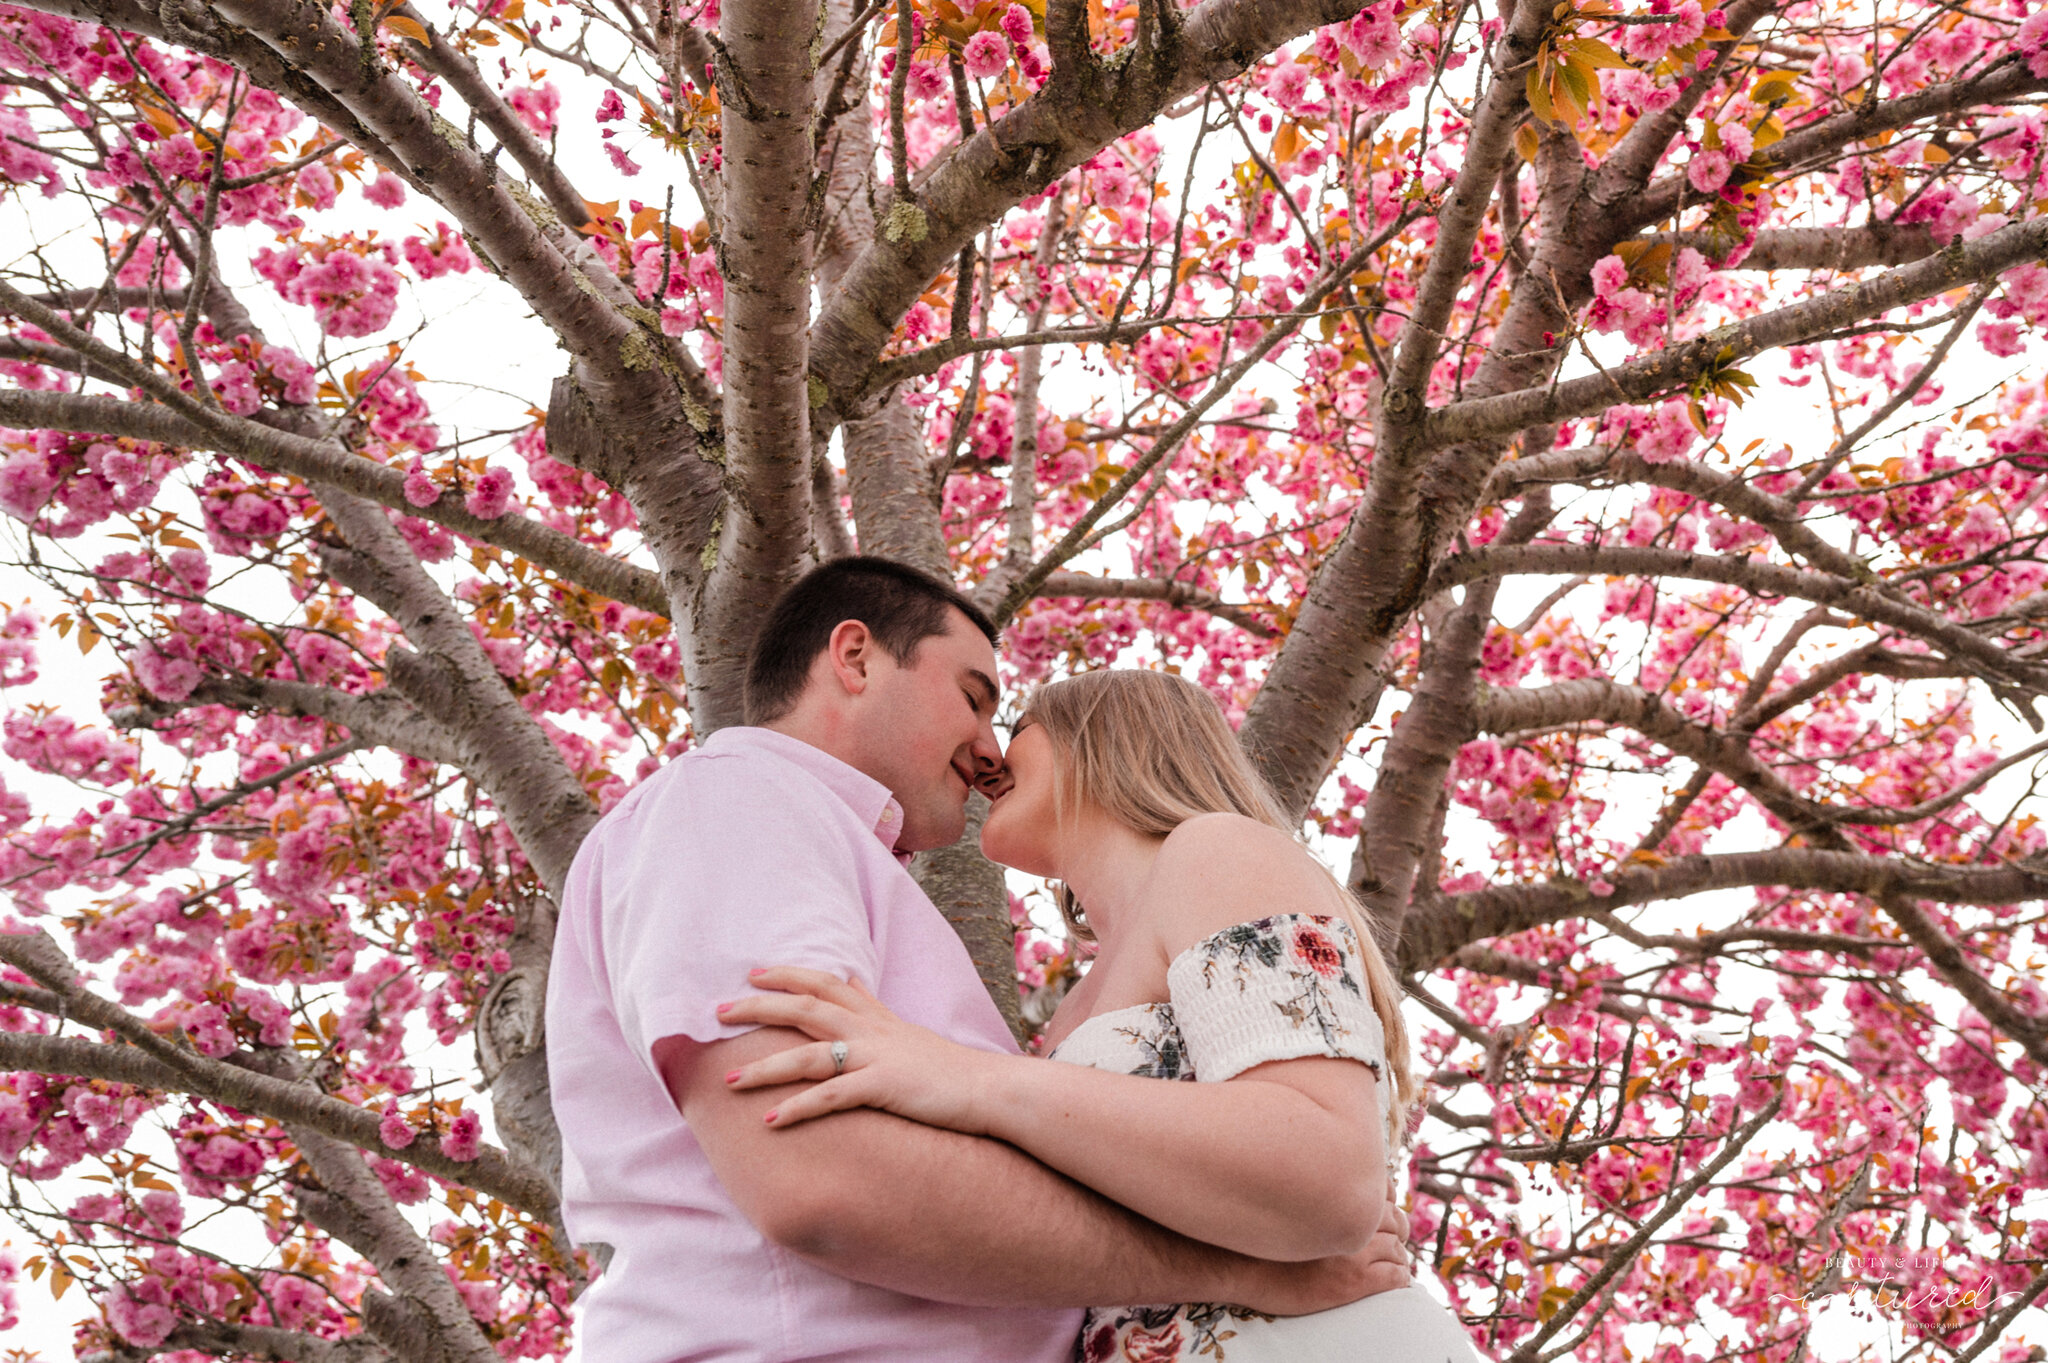 Beauty_and_Life_Captured_Taylor_and_Drew_Engagement-36.jpg